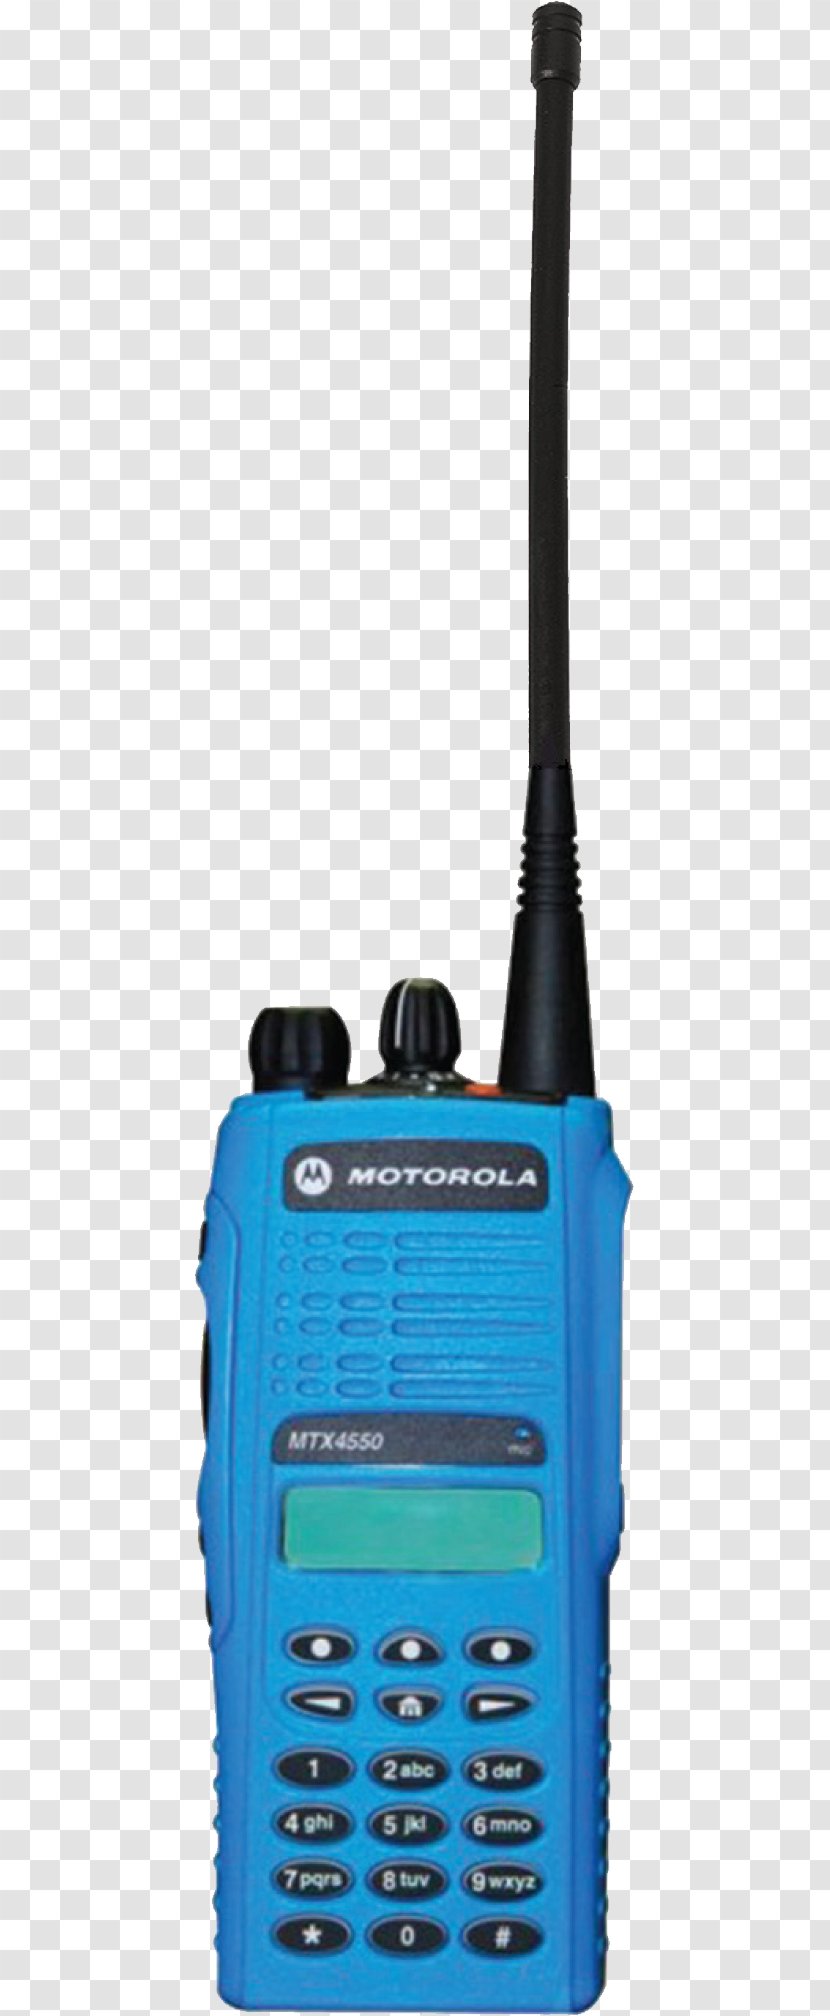 Two-way Radio Walkie-talkie Motorola Solutions - Handheld Game Console - Fire Equipment Manufacturers' Association Transparent PNG